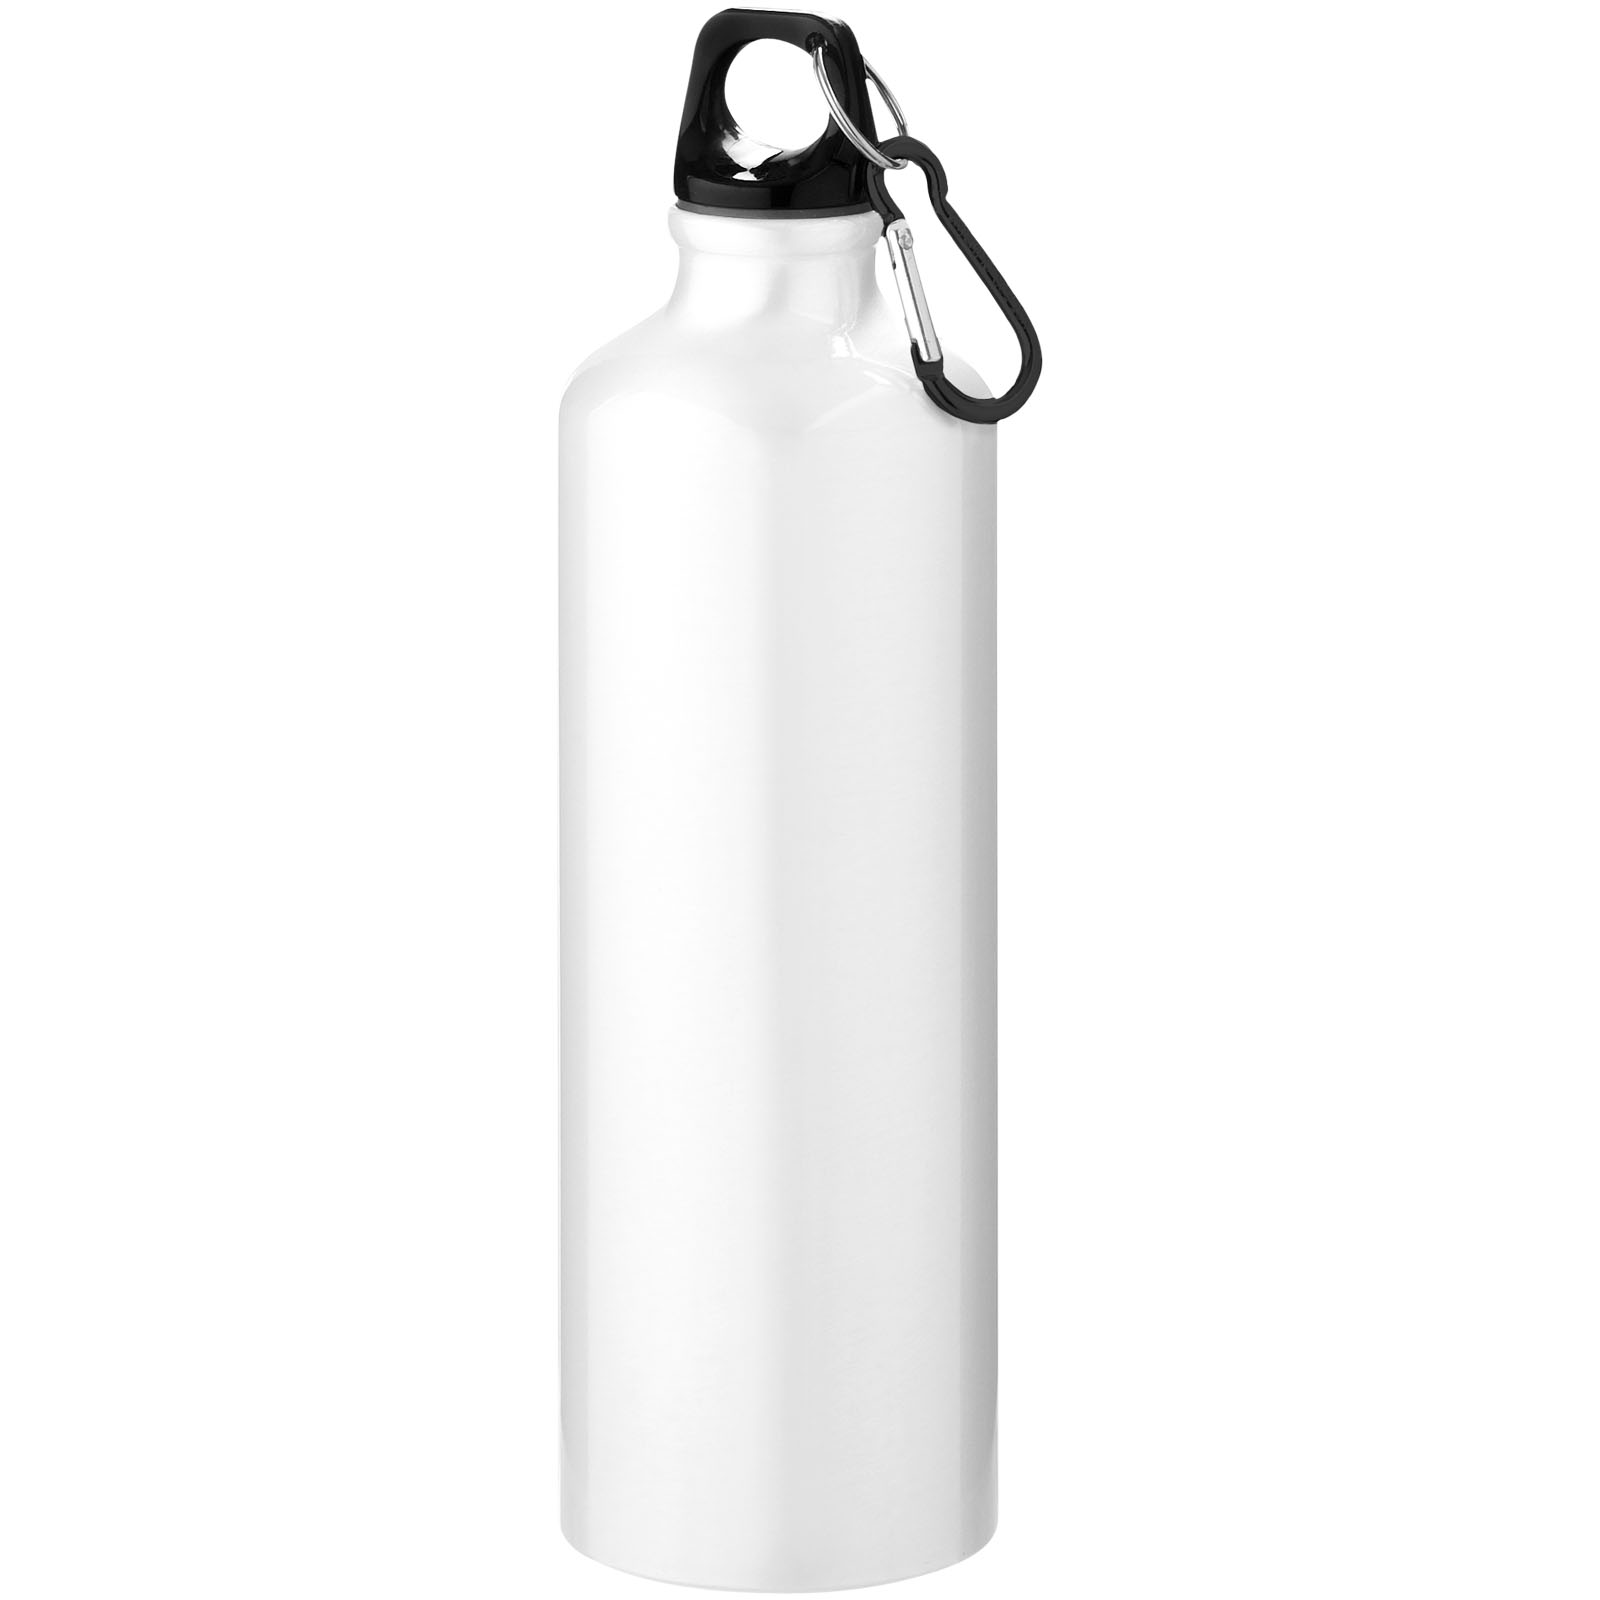 Advertising Water bottles - Oregon 770 ml RCS certified recycled aluminium water bottle with carabiner